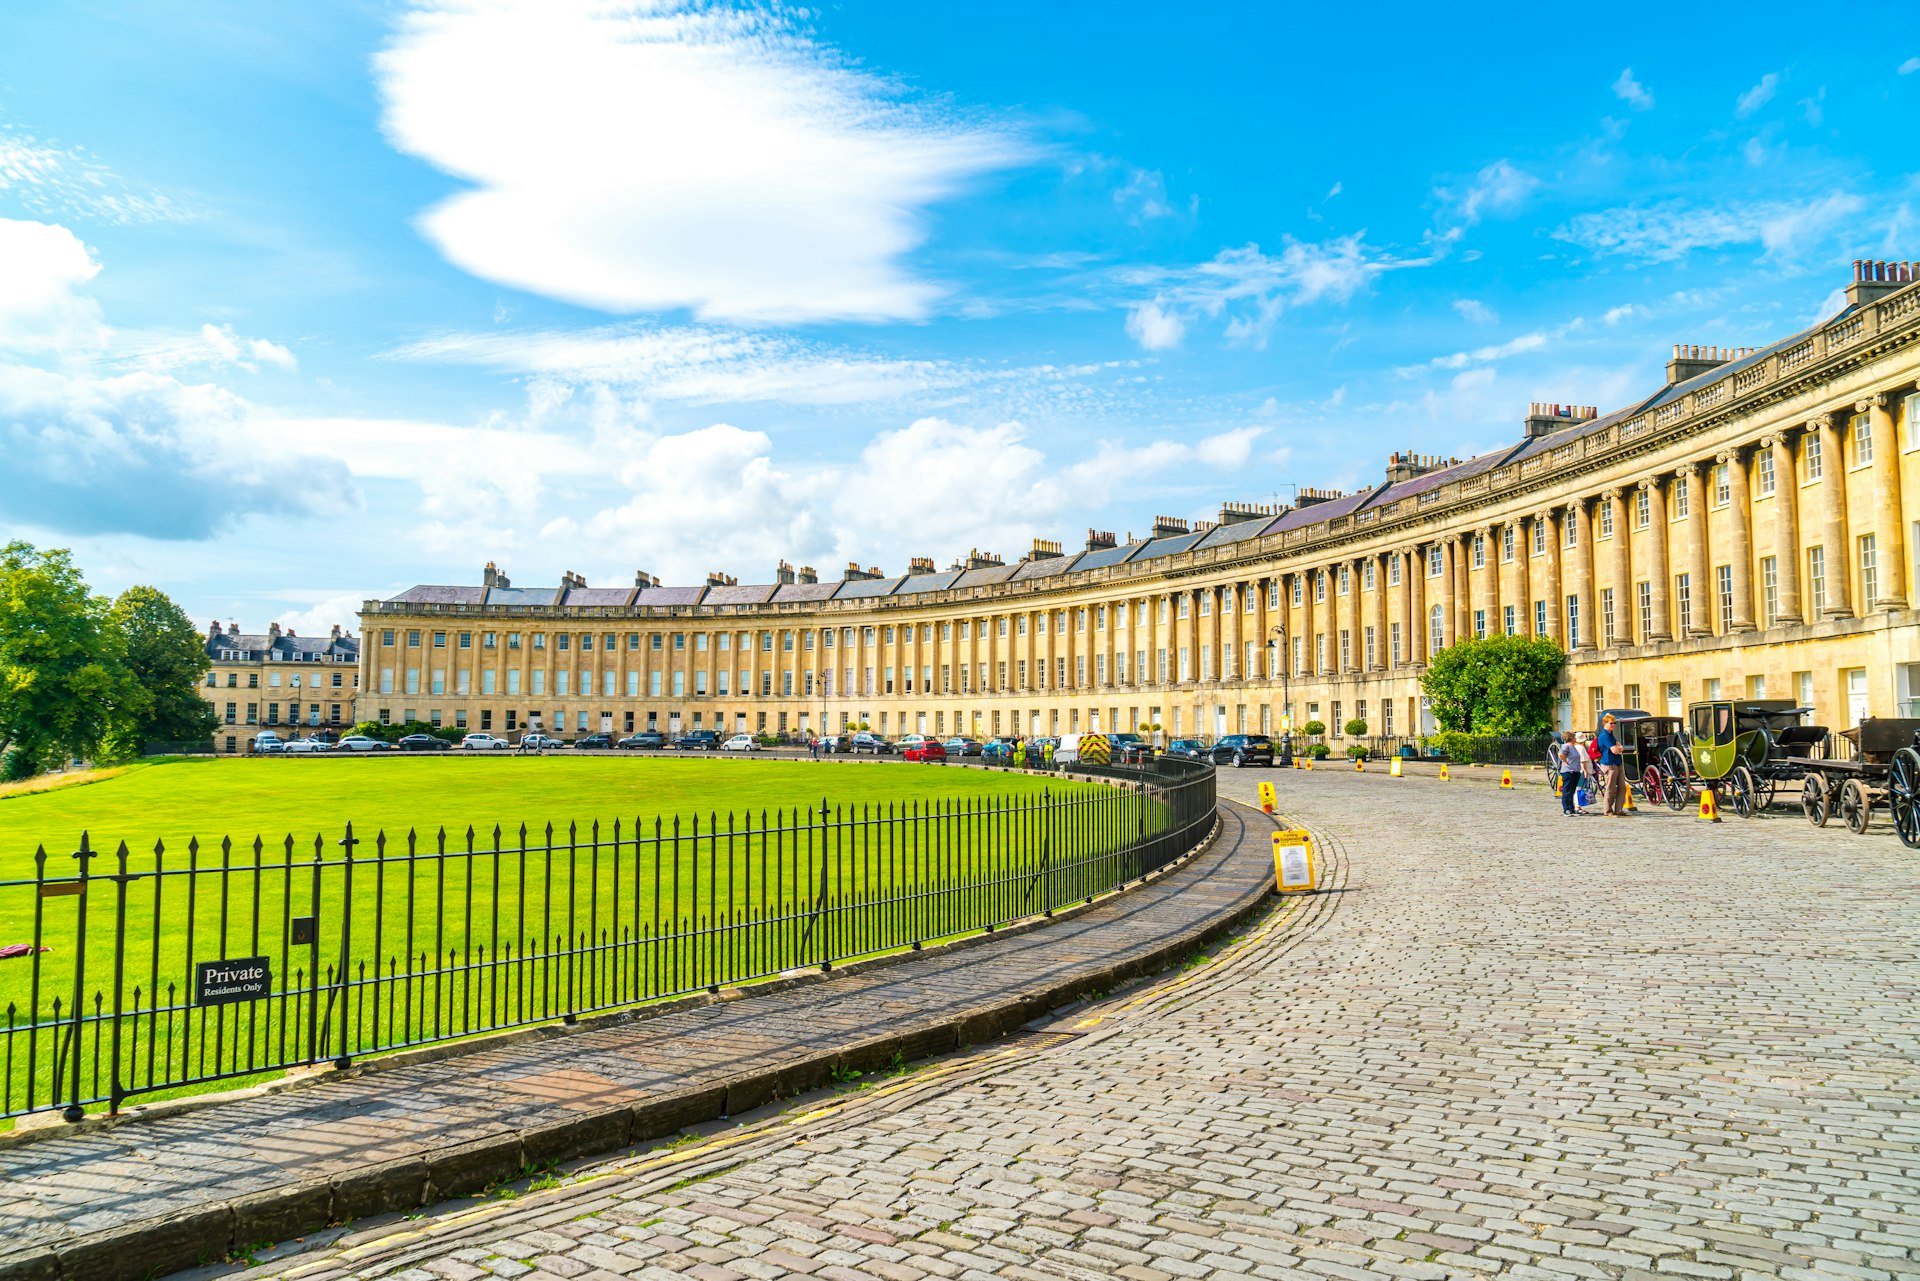 The famous Royal Crescent at Bath, Somerset, England, United Kingdom